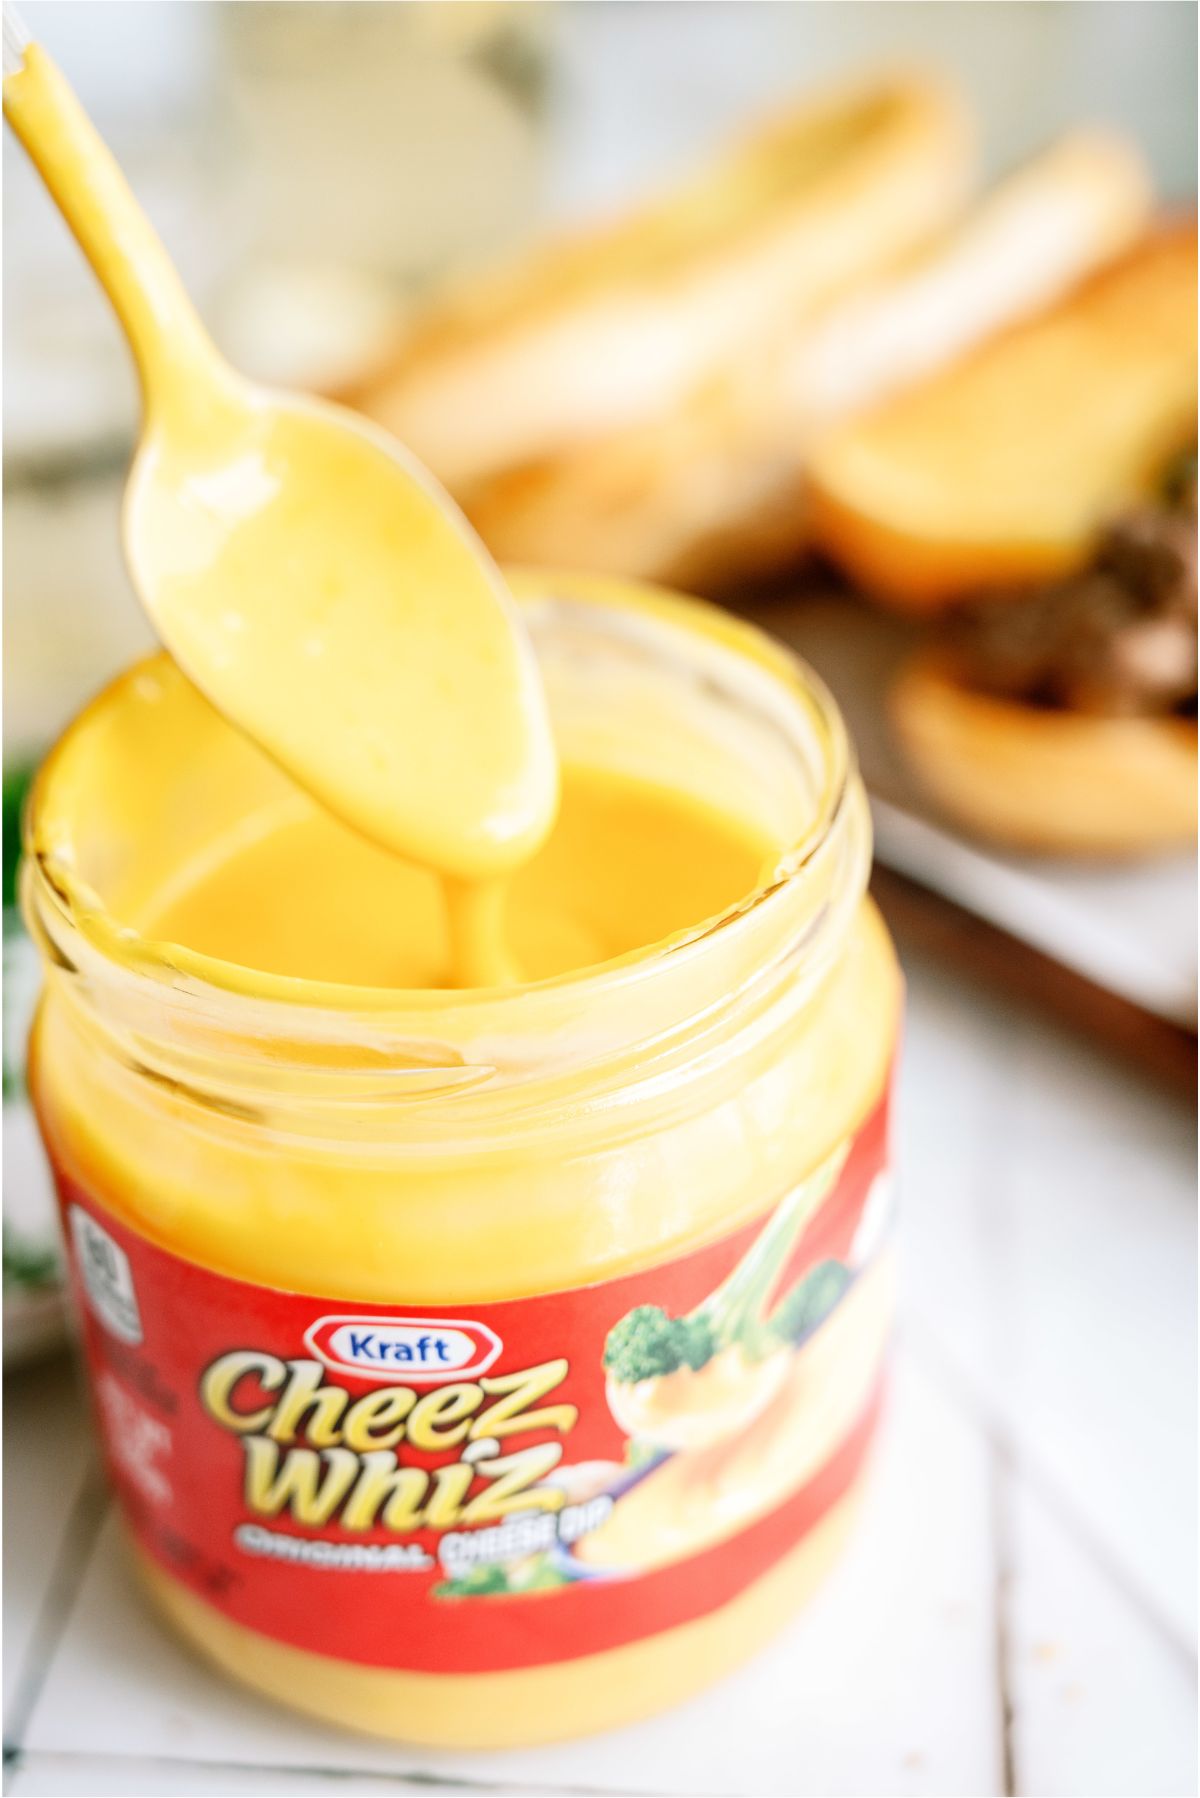 A jar of cheese whiz with a spoon